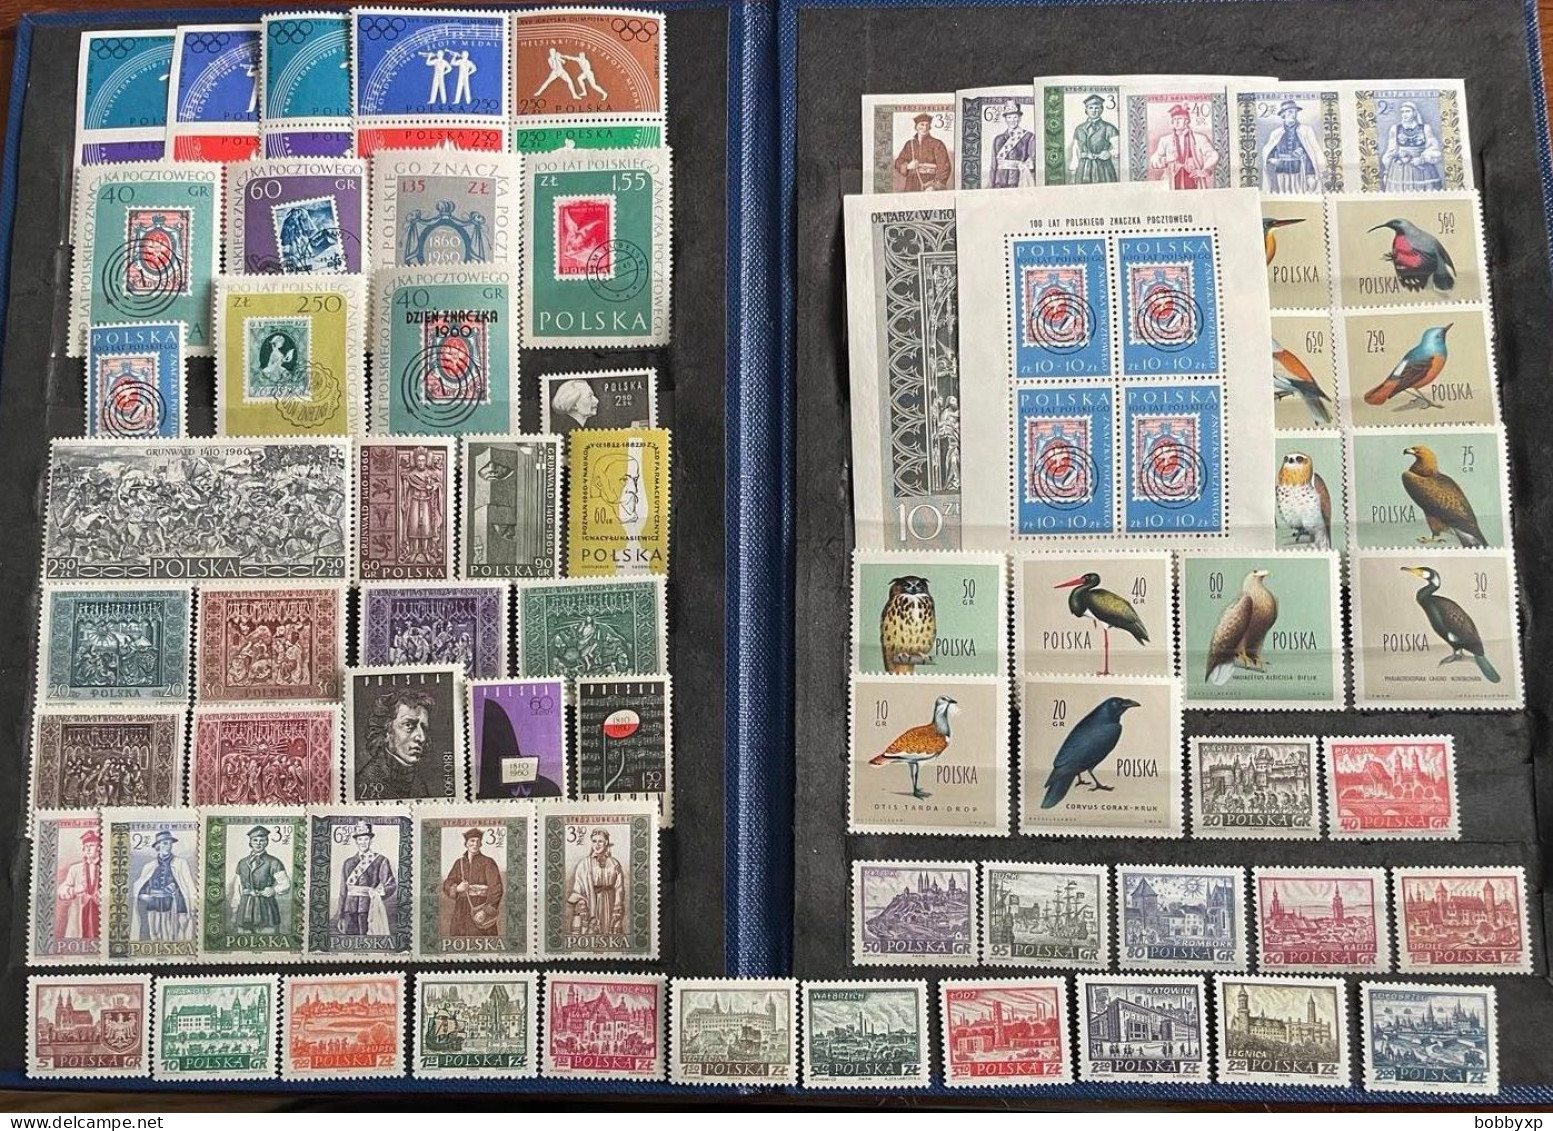 Poland 1960. Complete Year Set 88 Stamps And 2 Souvenir Sheets. MNH - Años Completos